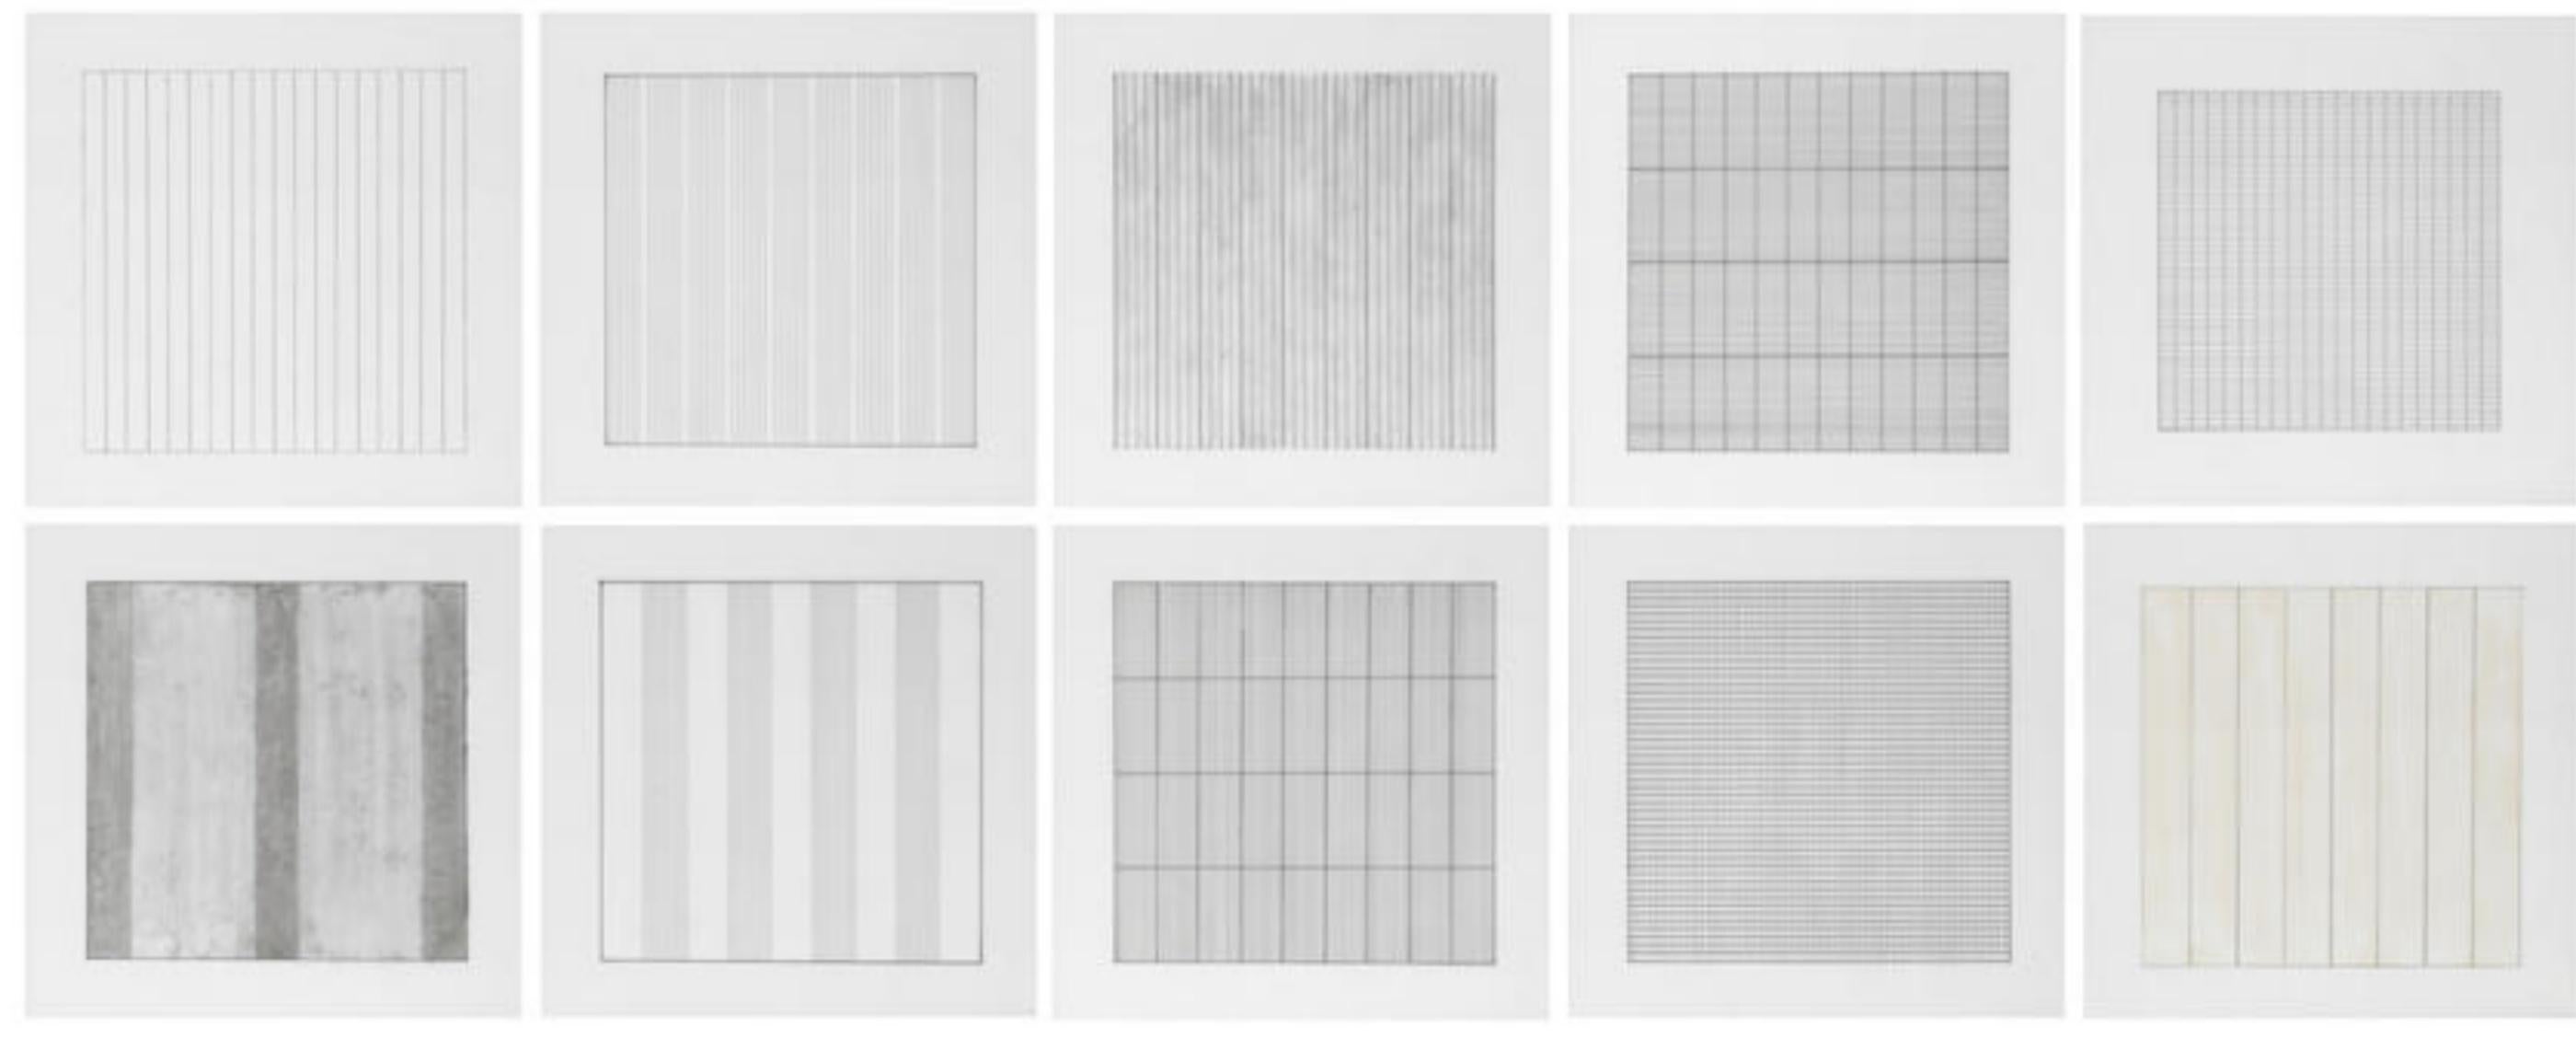 Paintings and Drawings: Suite of 10 Separate (Individual) lithographs on vellum  - Minimalist Mixed Media Art by Agnes Martin